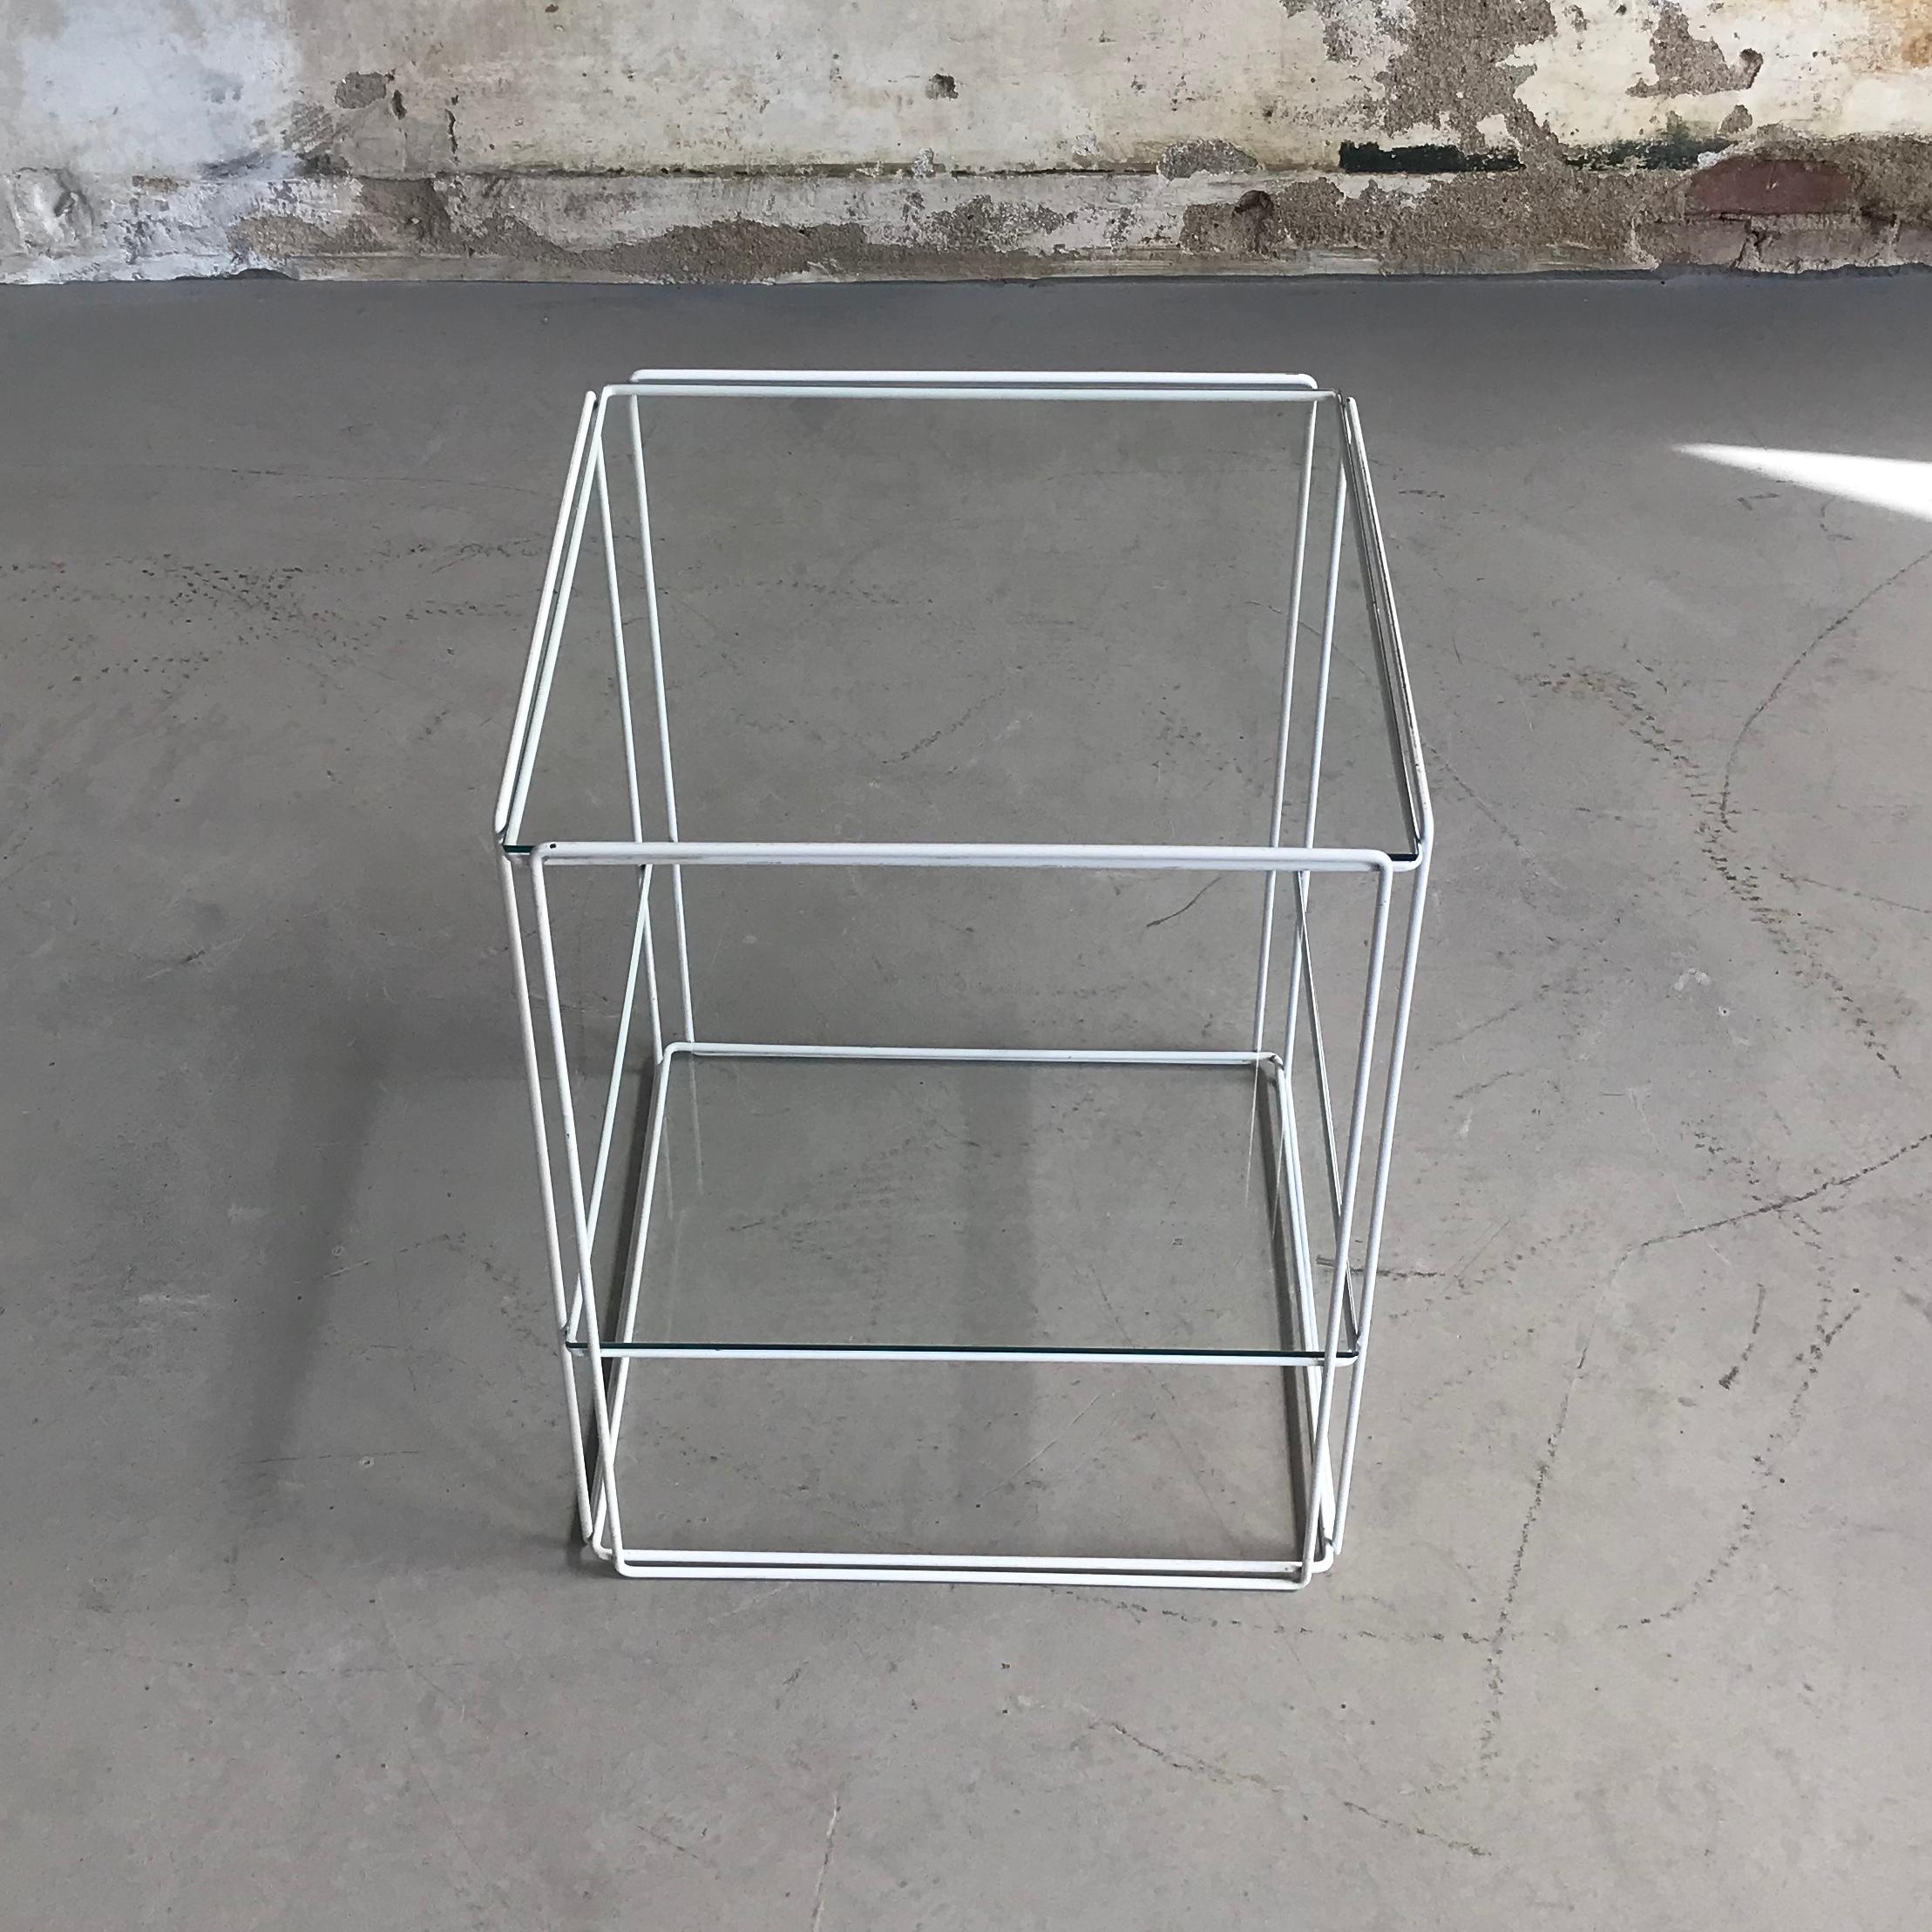 Beautiful Minimalist design by Max Sauze for Max Sauze Studio or Atrow, circa 1970. This table features a white colored metal base and two glass 'shelves'. The glass and metal wire structure gives this table a very transparent, minimal look, but